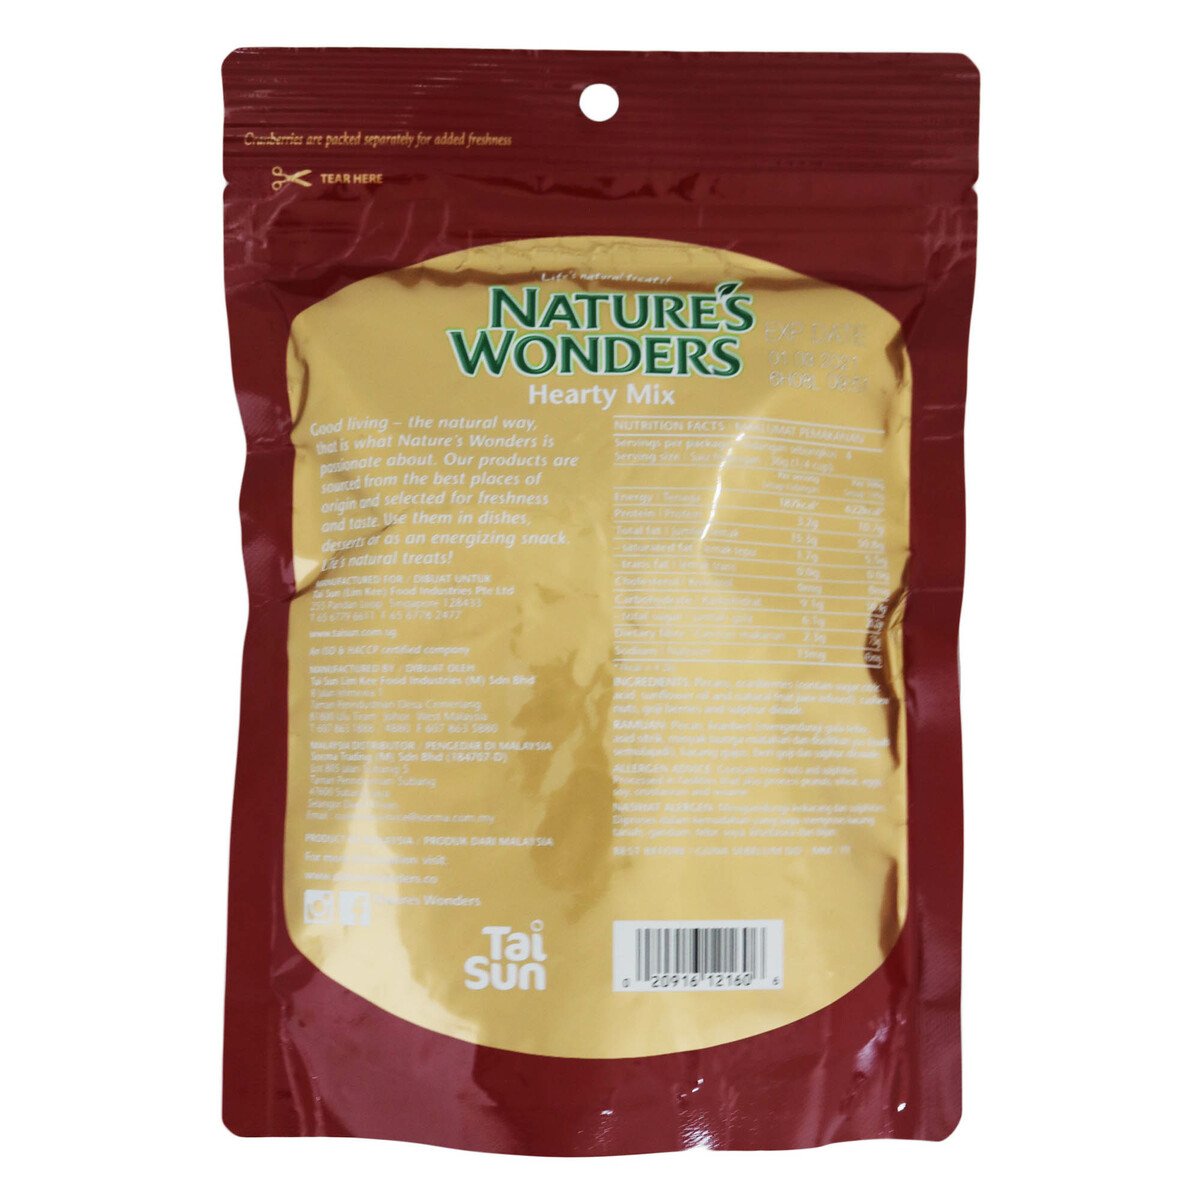 Nature Wonders Hearty Mix 130g